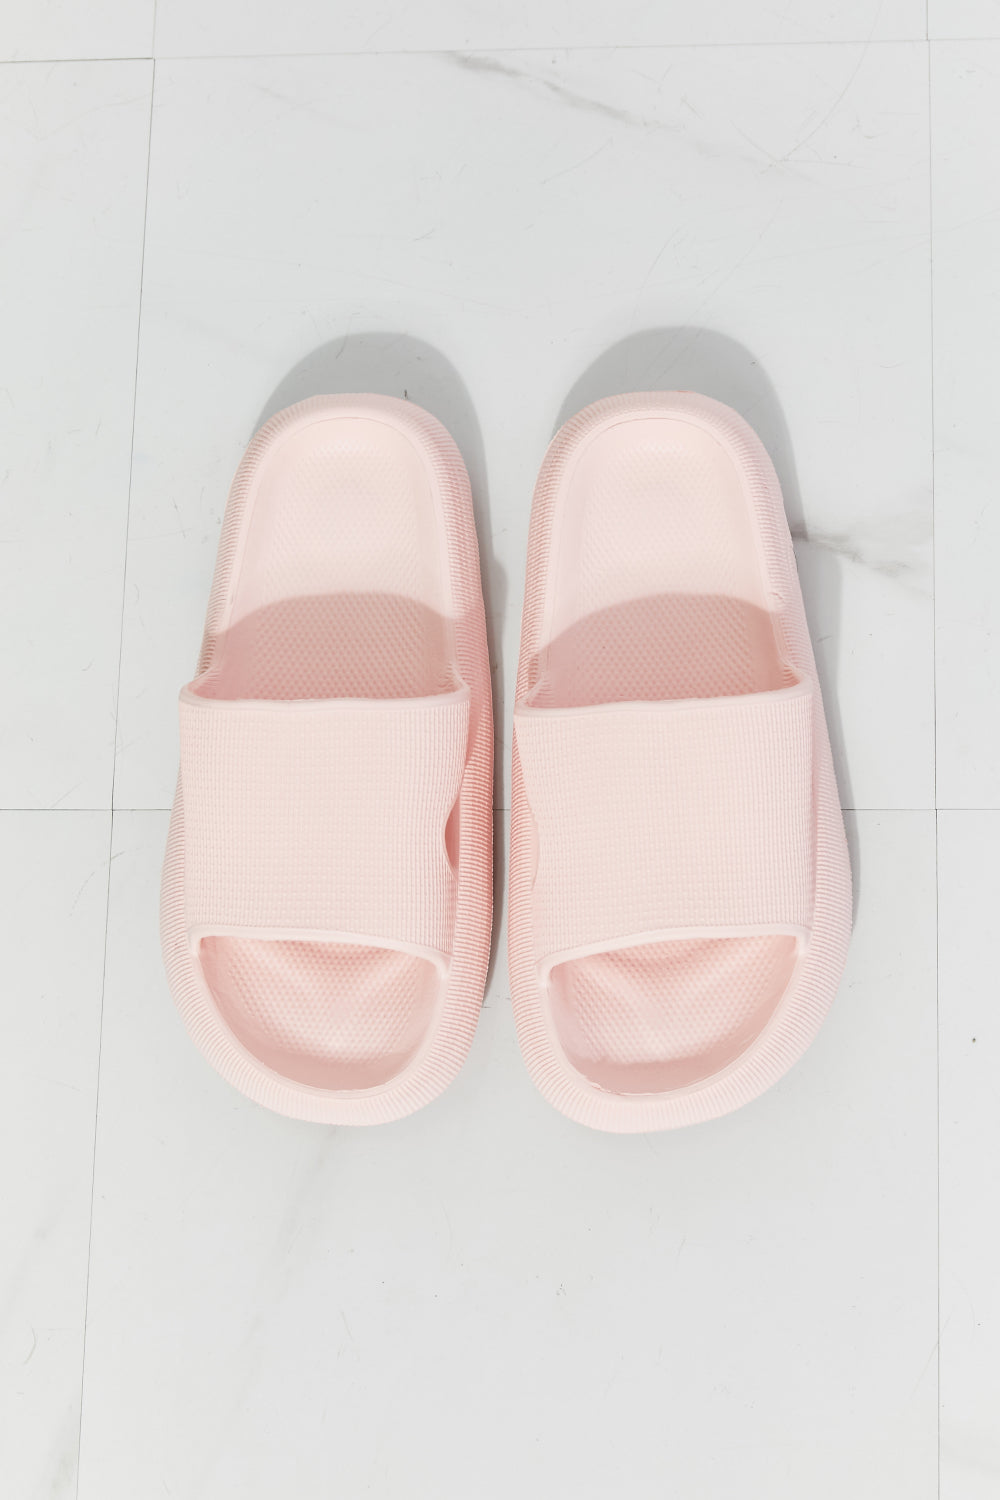 Light Gray MMShoes Arms Around Me Open Toe Slide in Pink Clothing